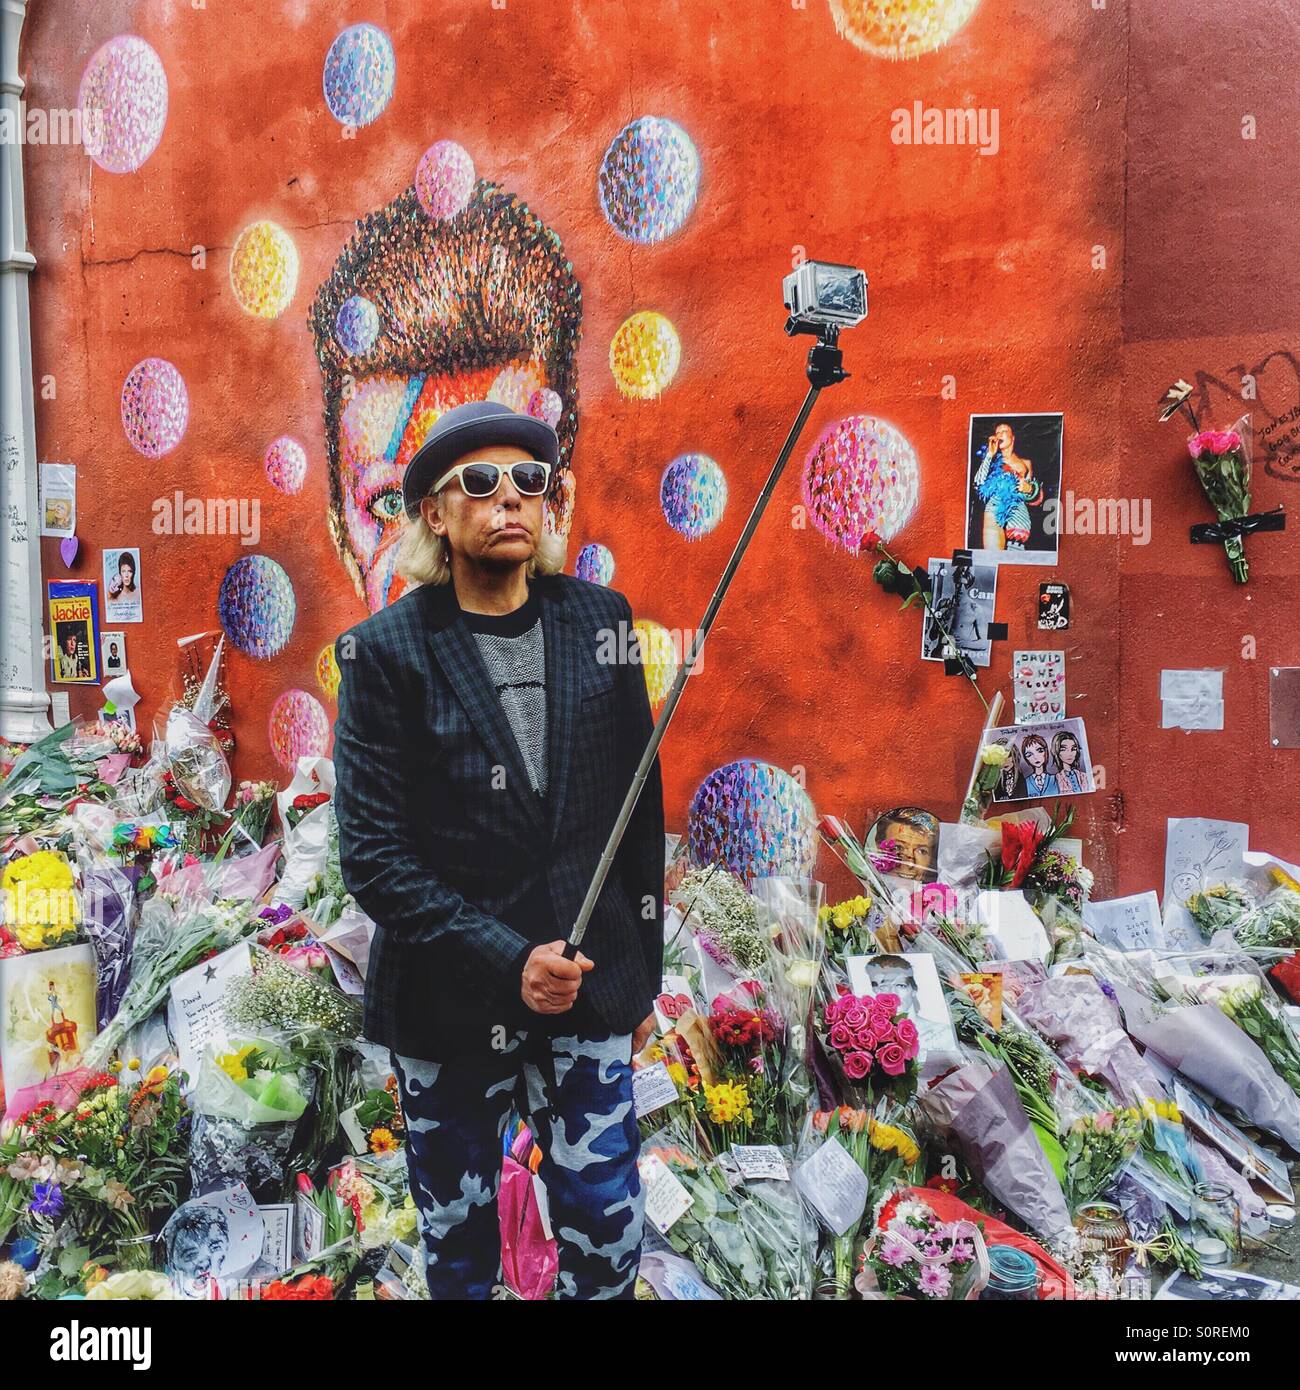 Fan taking a selfie at the David Bowie mural in Brixton London that has become a focus for tributes Stock Photo